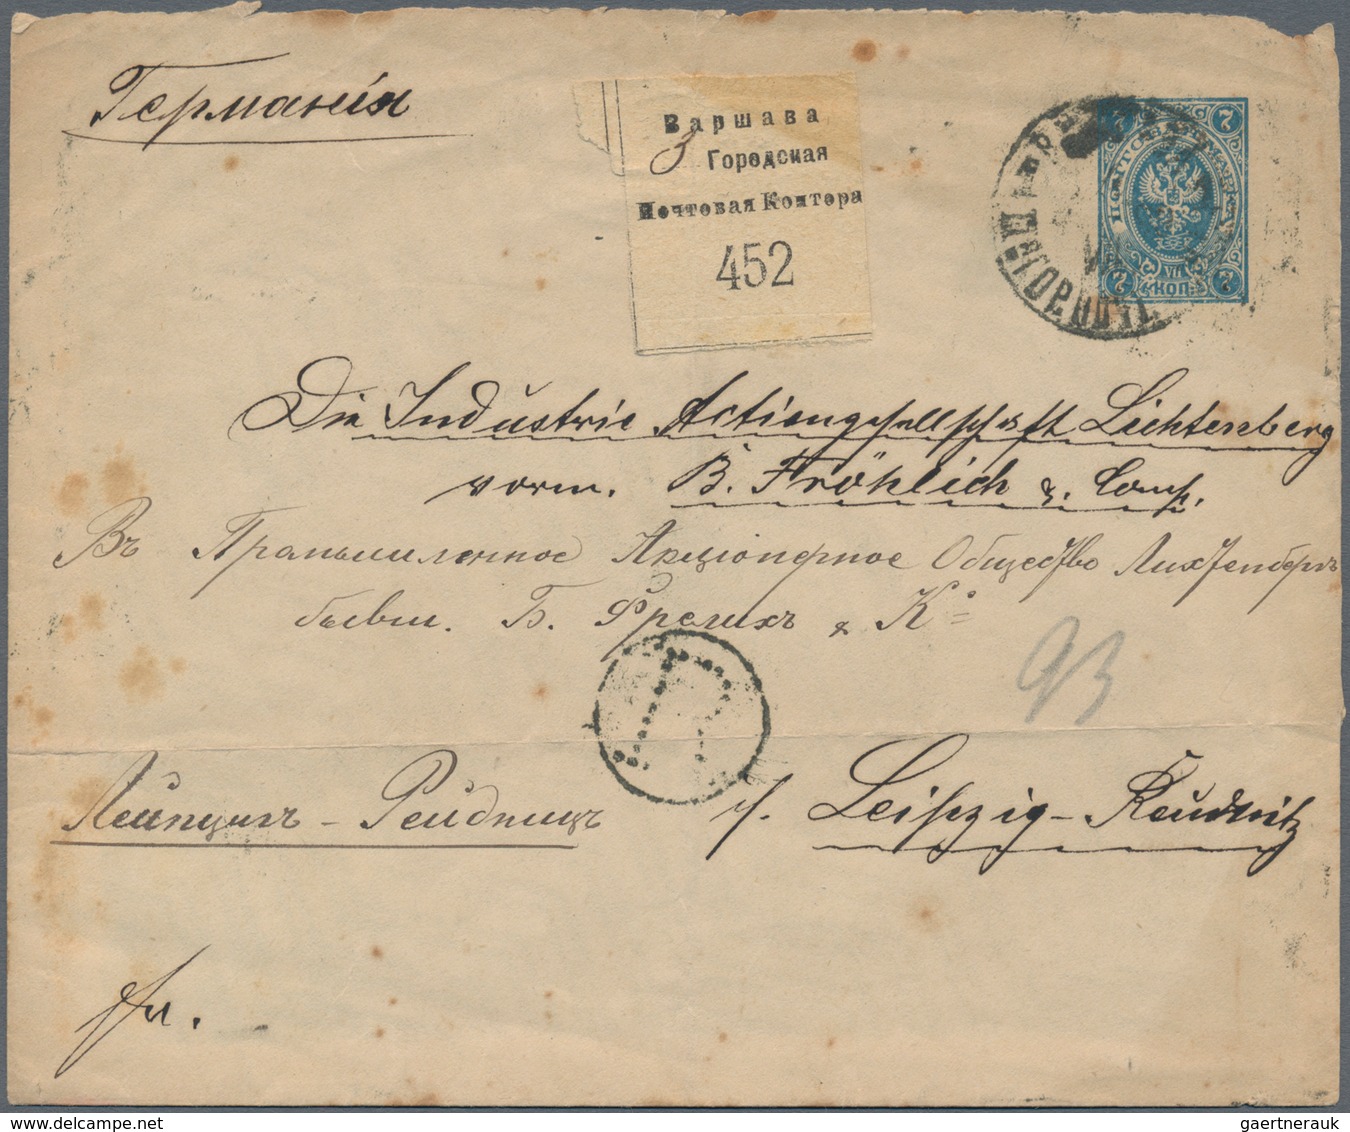 Polen - Russische Periode: 1889/1911 8 better items all send in Poland incl. rare white registration